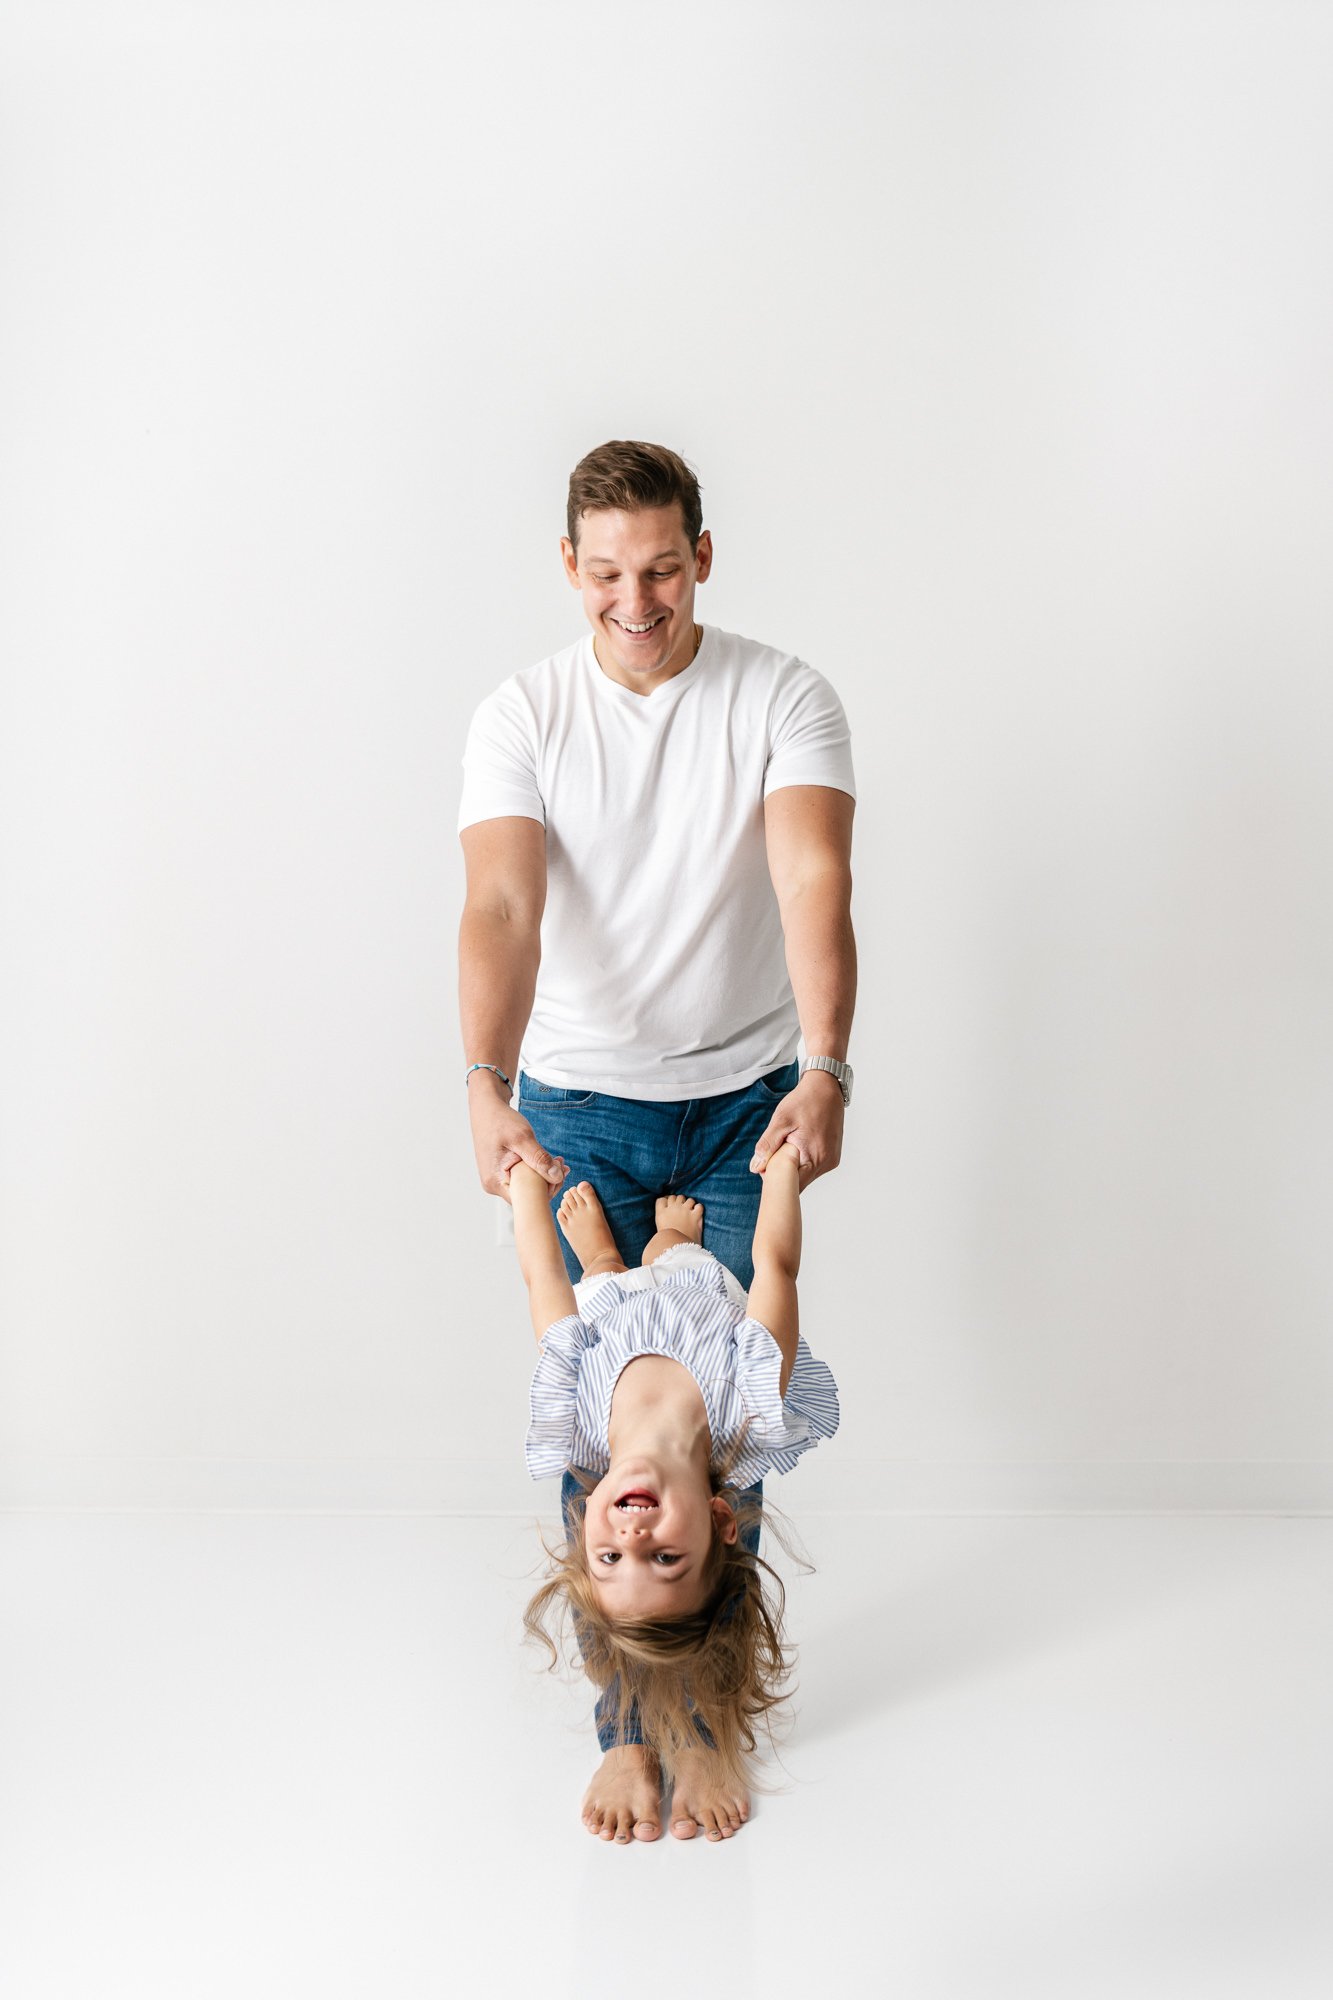  Nicole Hawkins Photography, an NJ family photographer, captures a father playing with his little girl in an all-white studio. daddy daughter pic dad style for studio family photography #NicoleHawkinsPhotography #NicoleHawkinsMaternity #MaternityStud